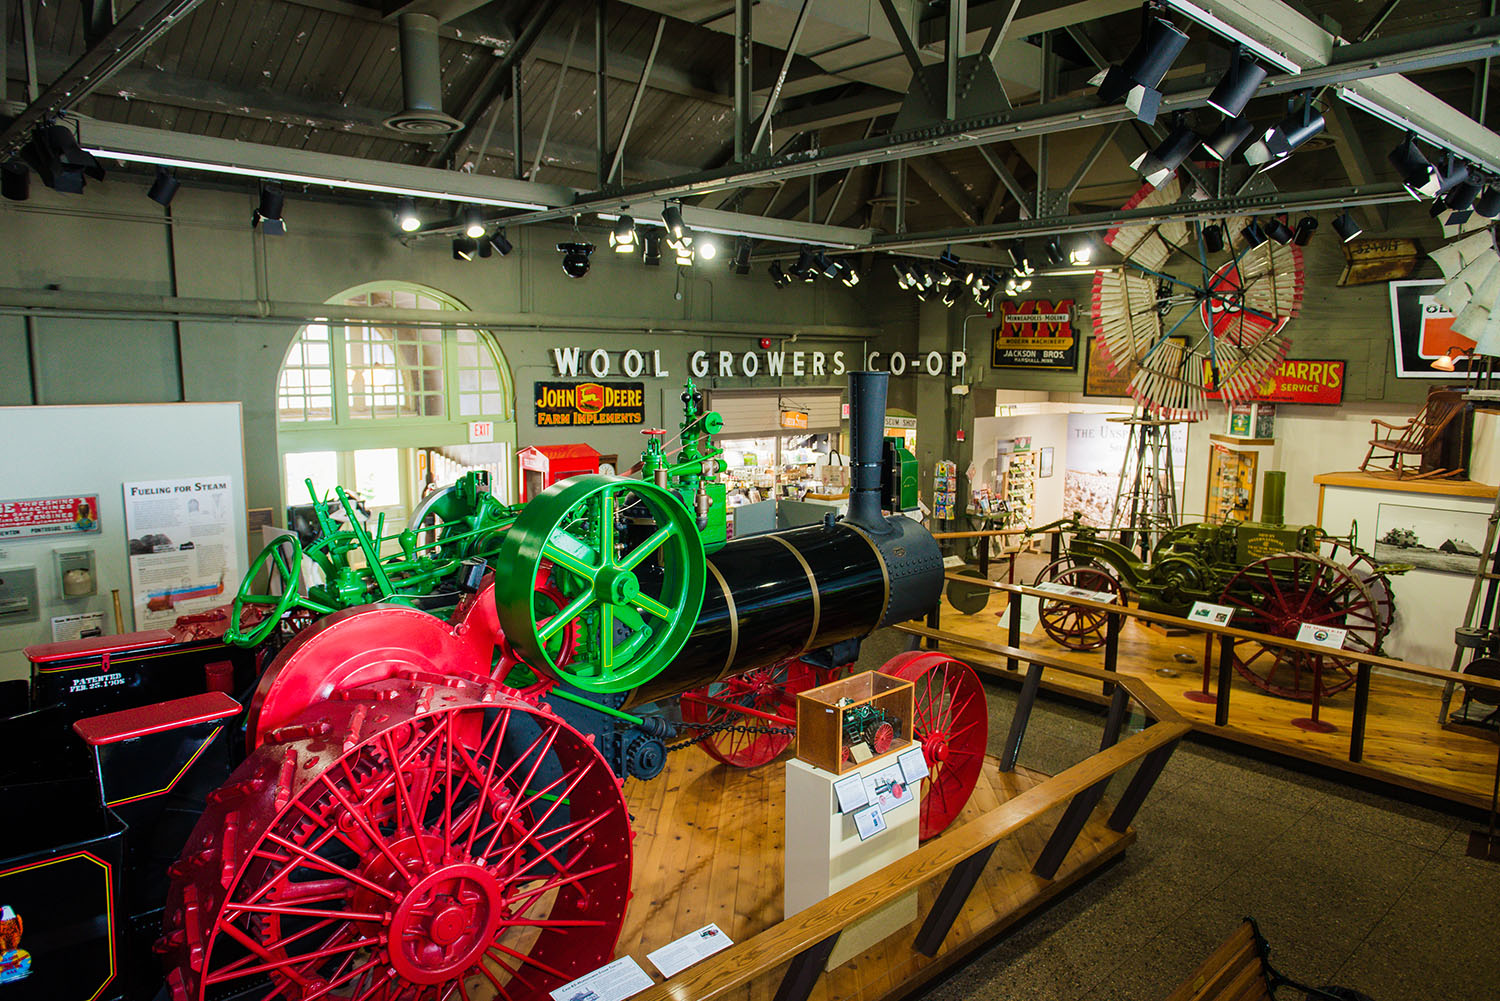 AGRICULTURAL HERITAGE MUSEUM